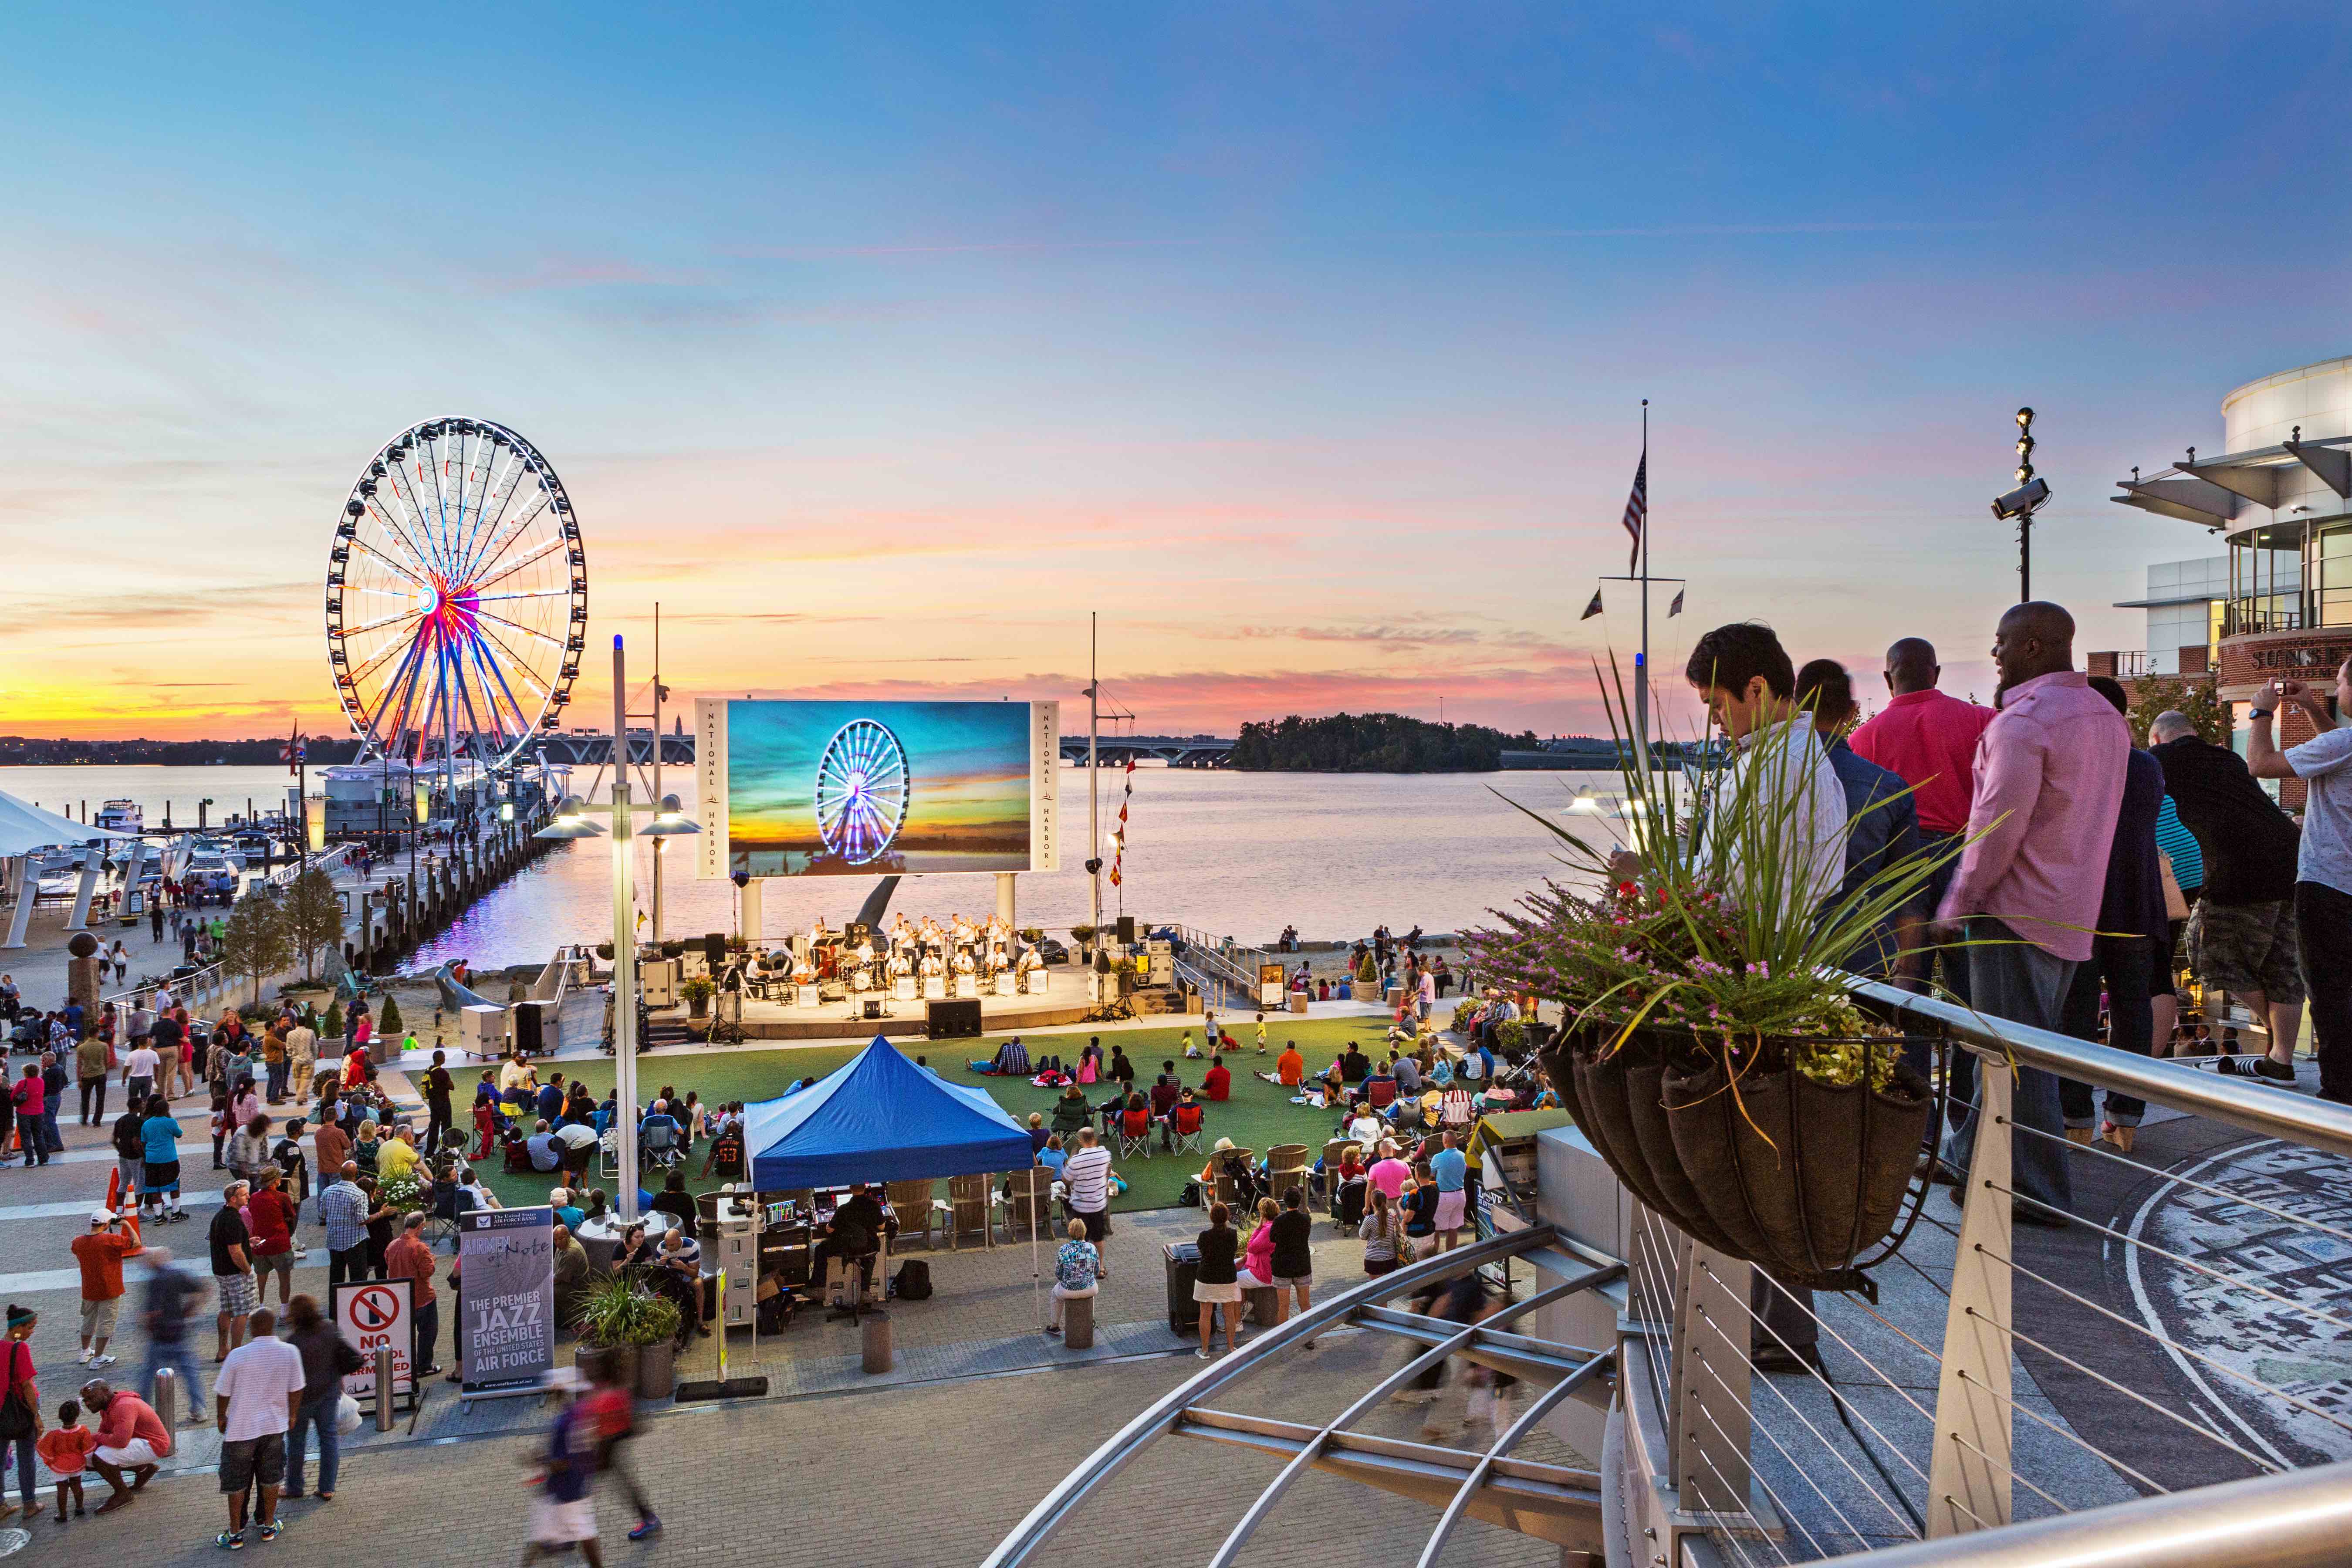 Award-winning projects by LandDesign in the Washington, D.C. area include National Harbor. (Courtesy LandDesign)